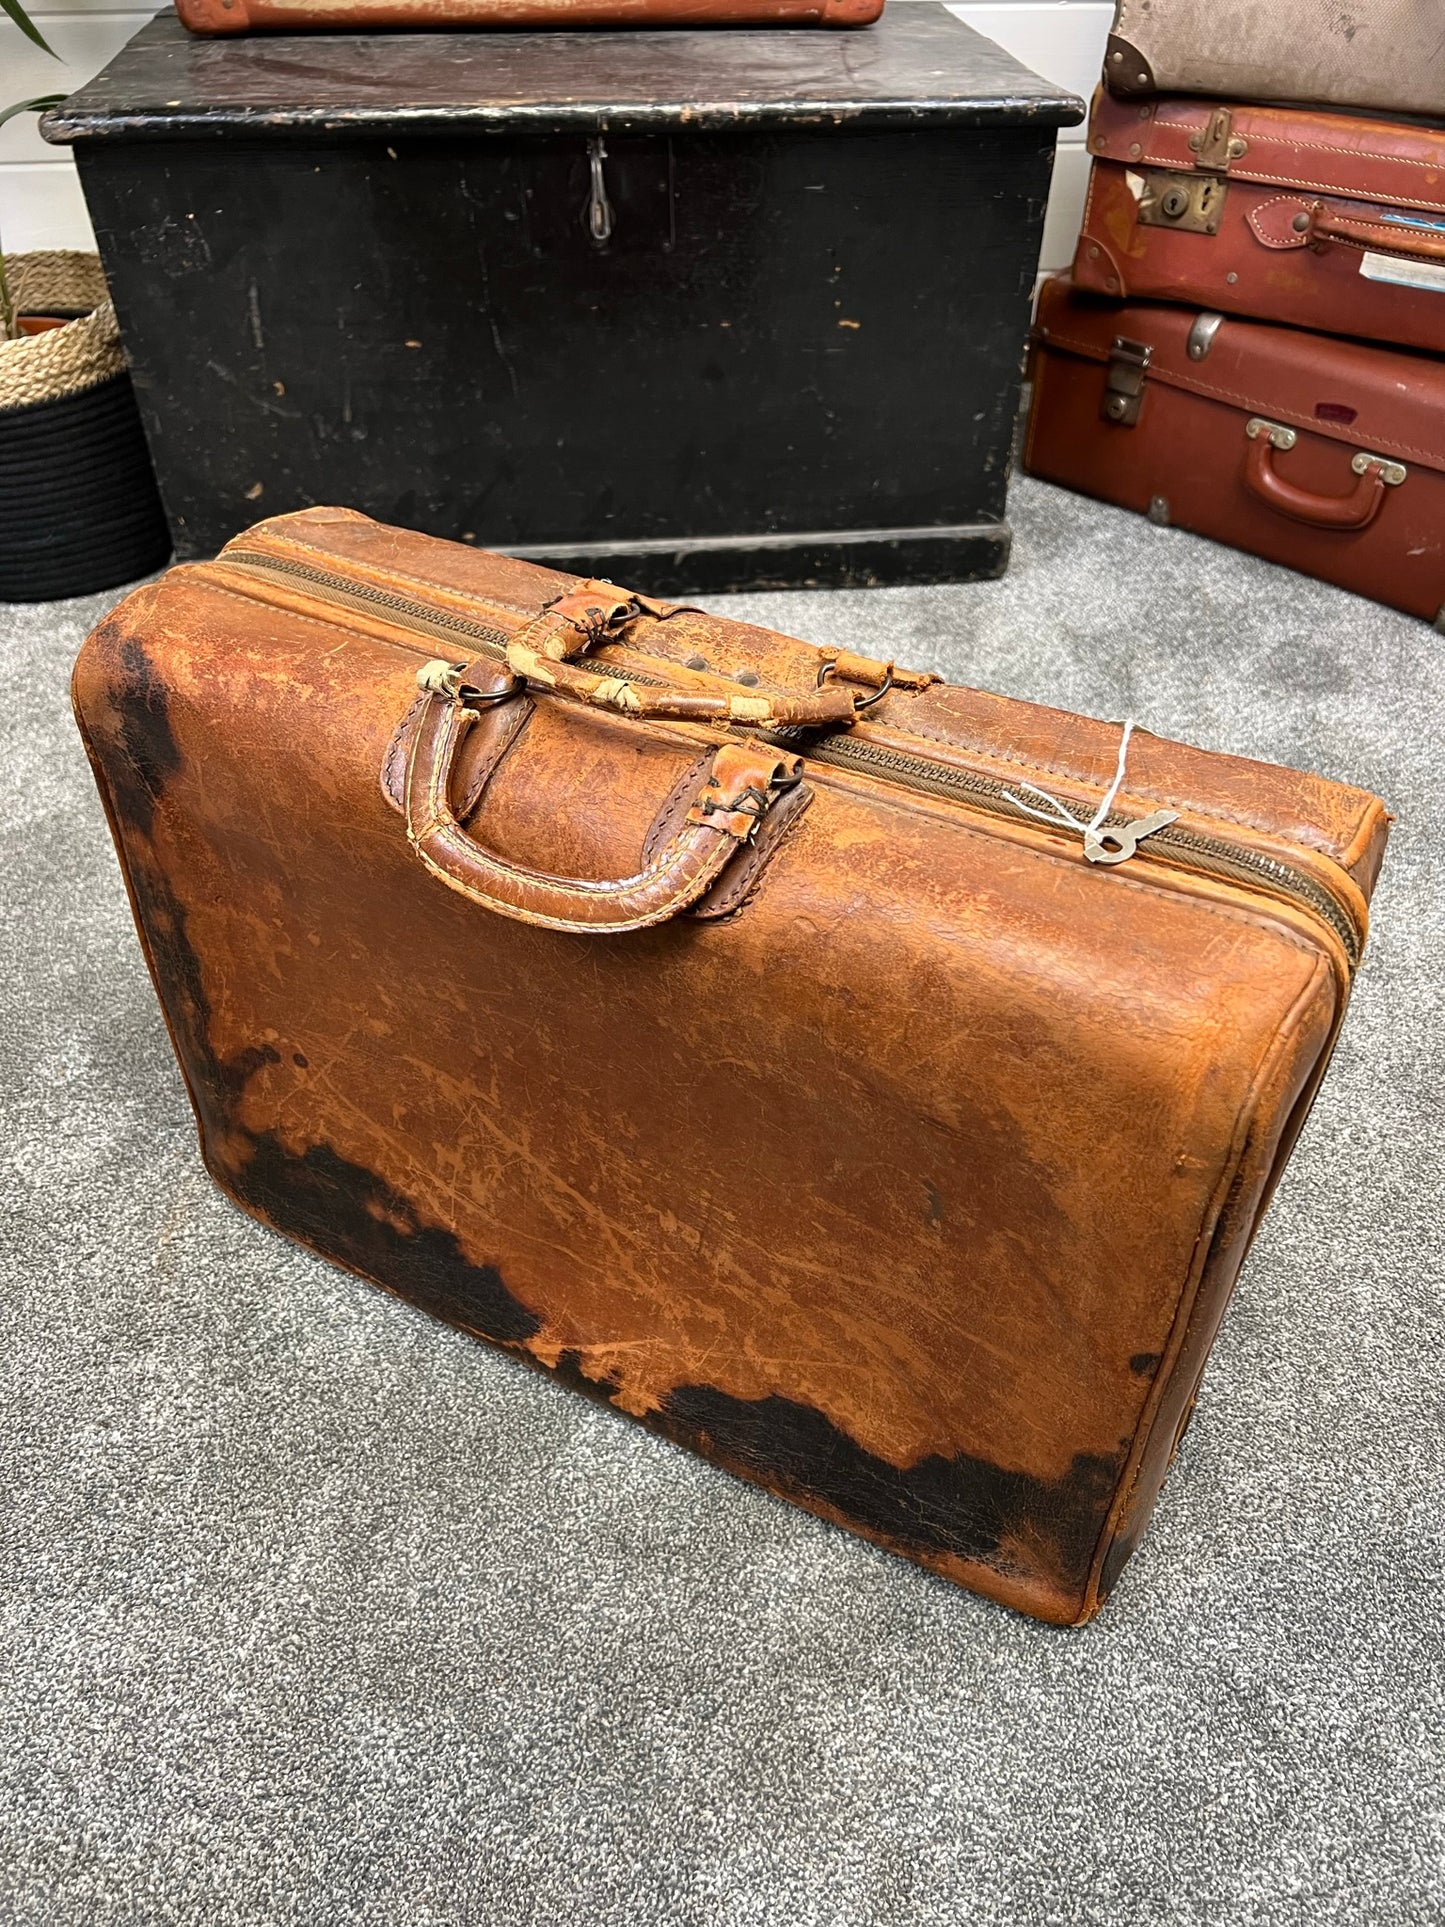 Vintage American Leather Zipper Suitcase Bag With Key Boho Decor Display Prop